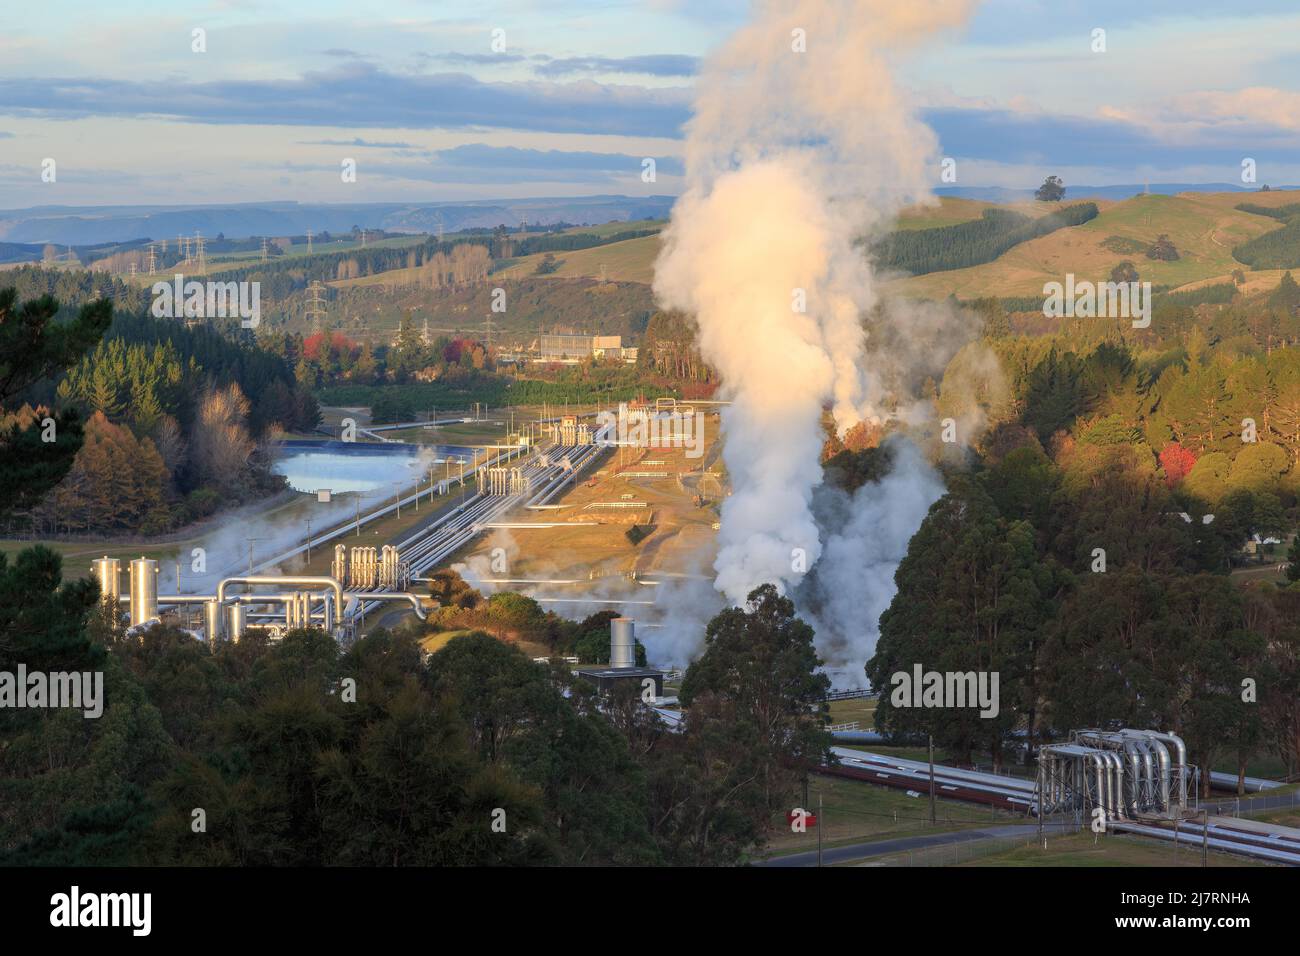 Steam rises from the Wairakei geothermal power station near Taupo, New Zealand Stock Photo